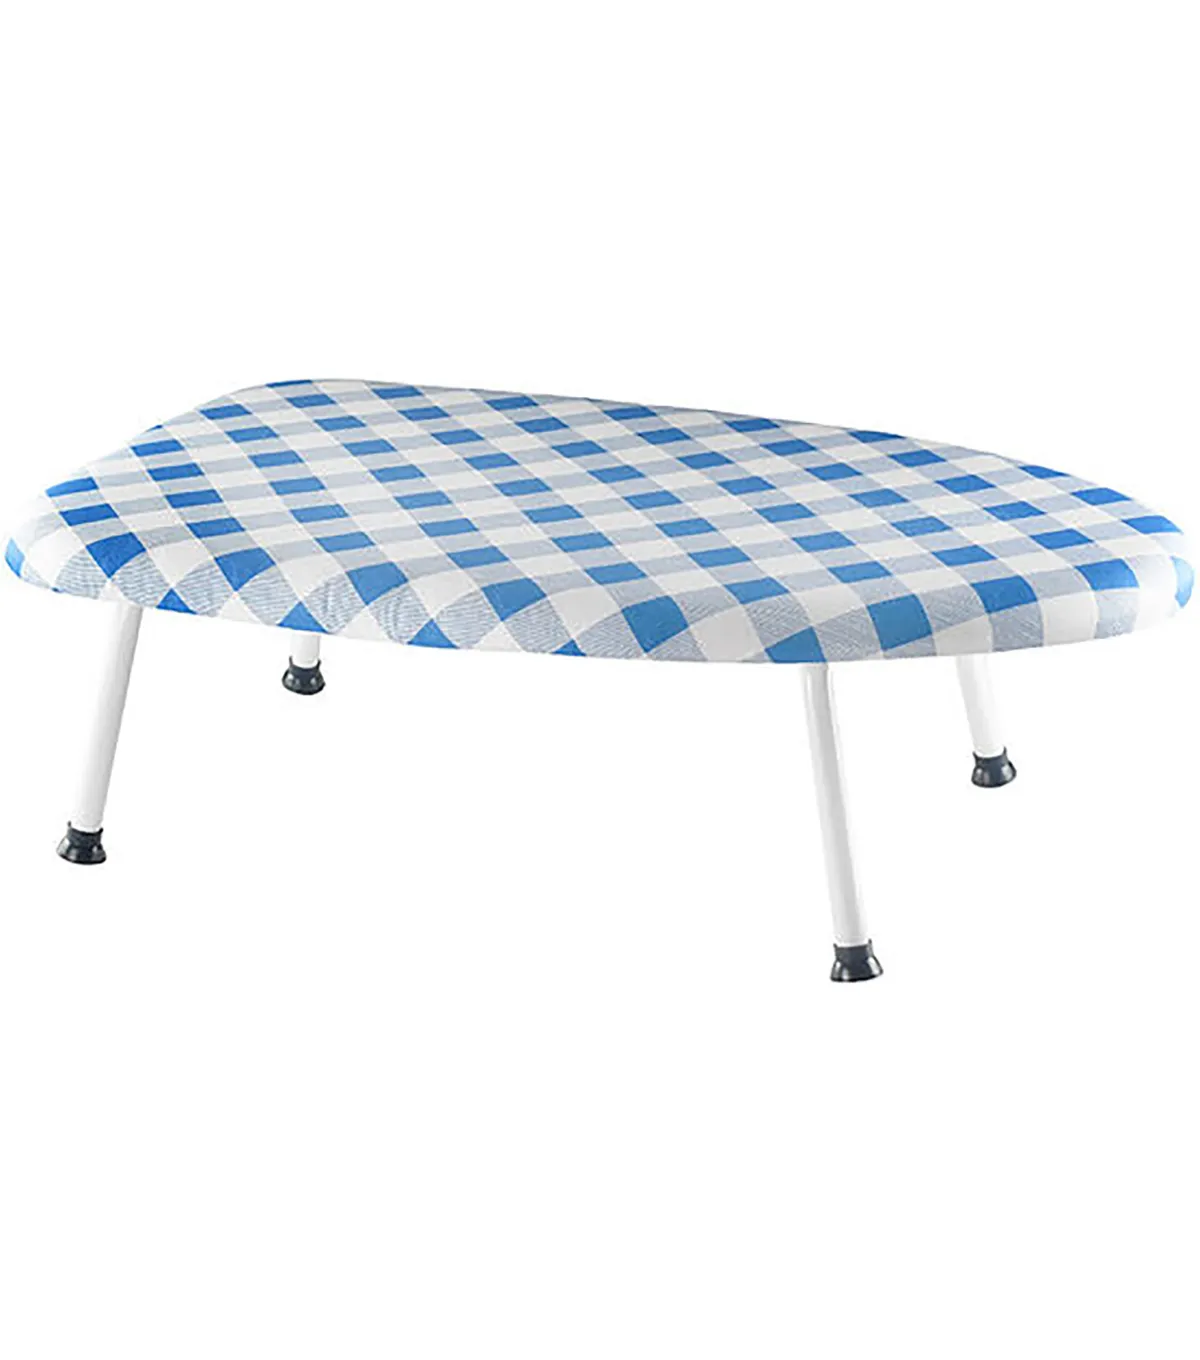 10 Best Quilting Ironing Boards 2020 [Buying Guide] – Geekwrapped